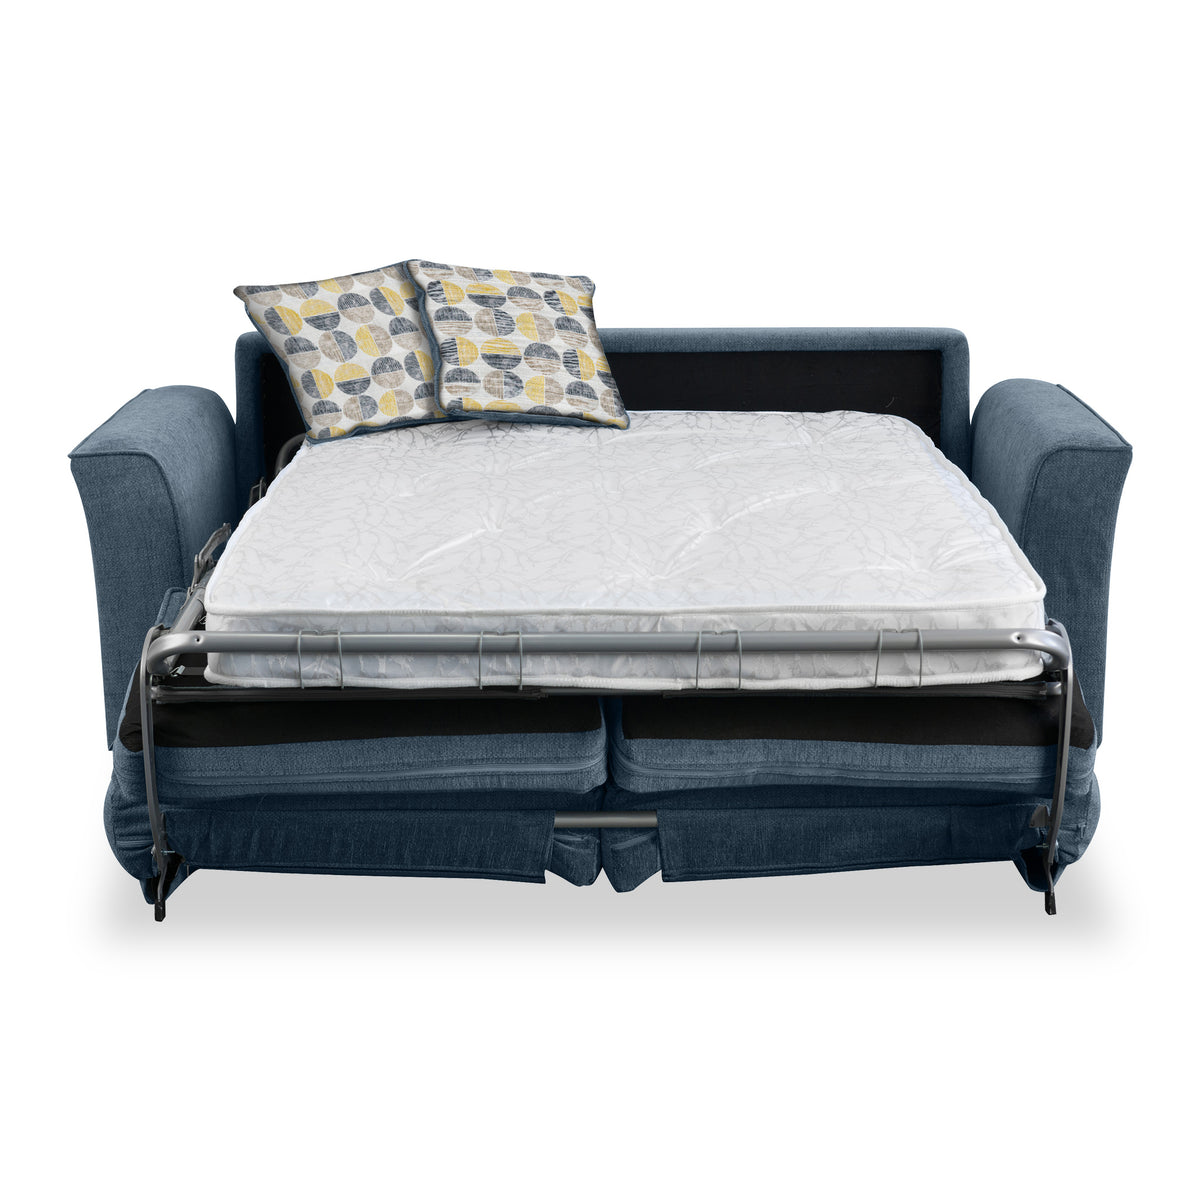 Boston 2 Seater Sofabed in Midnight with Rufus Beige Cushions by Roseland Furniture